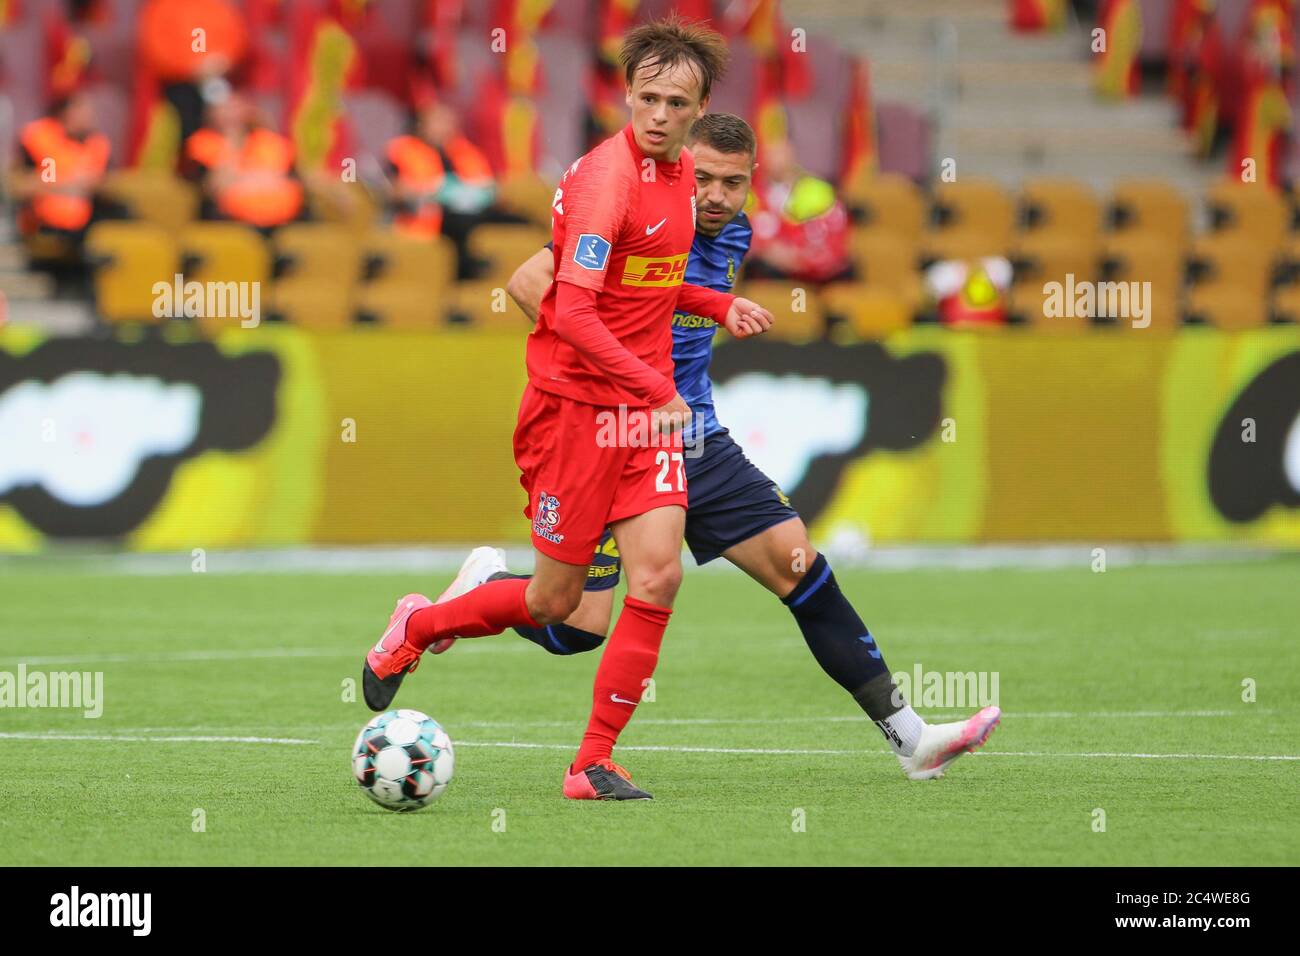 Farum Denmark 28th June 2020 Mikkel Damsgaard 27 Of Fc Nordsjaelland Seen During The 3f Superliga Match Between Fc Nordsjaelland And Broendby If At Right To Dream Park In Farum Photo Credit